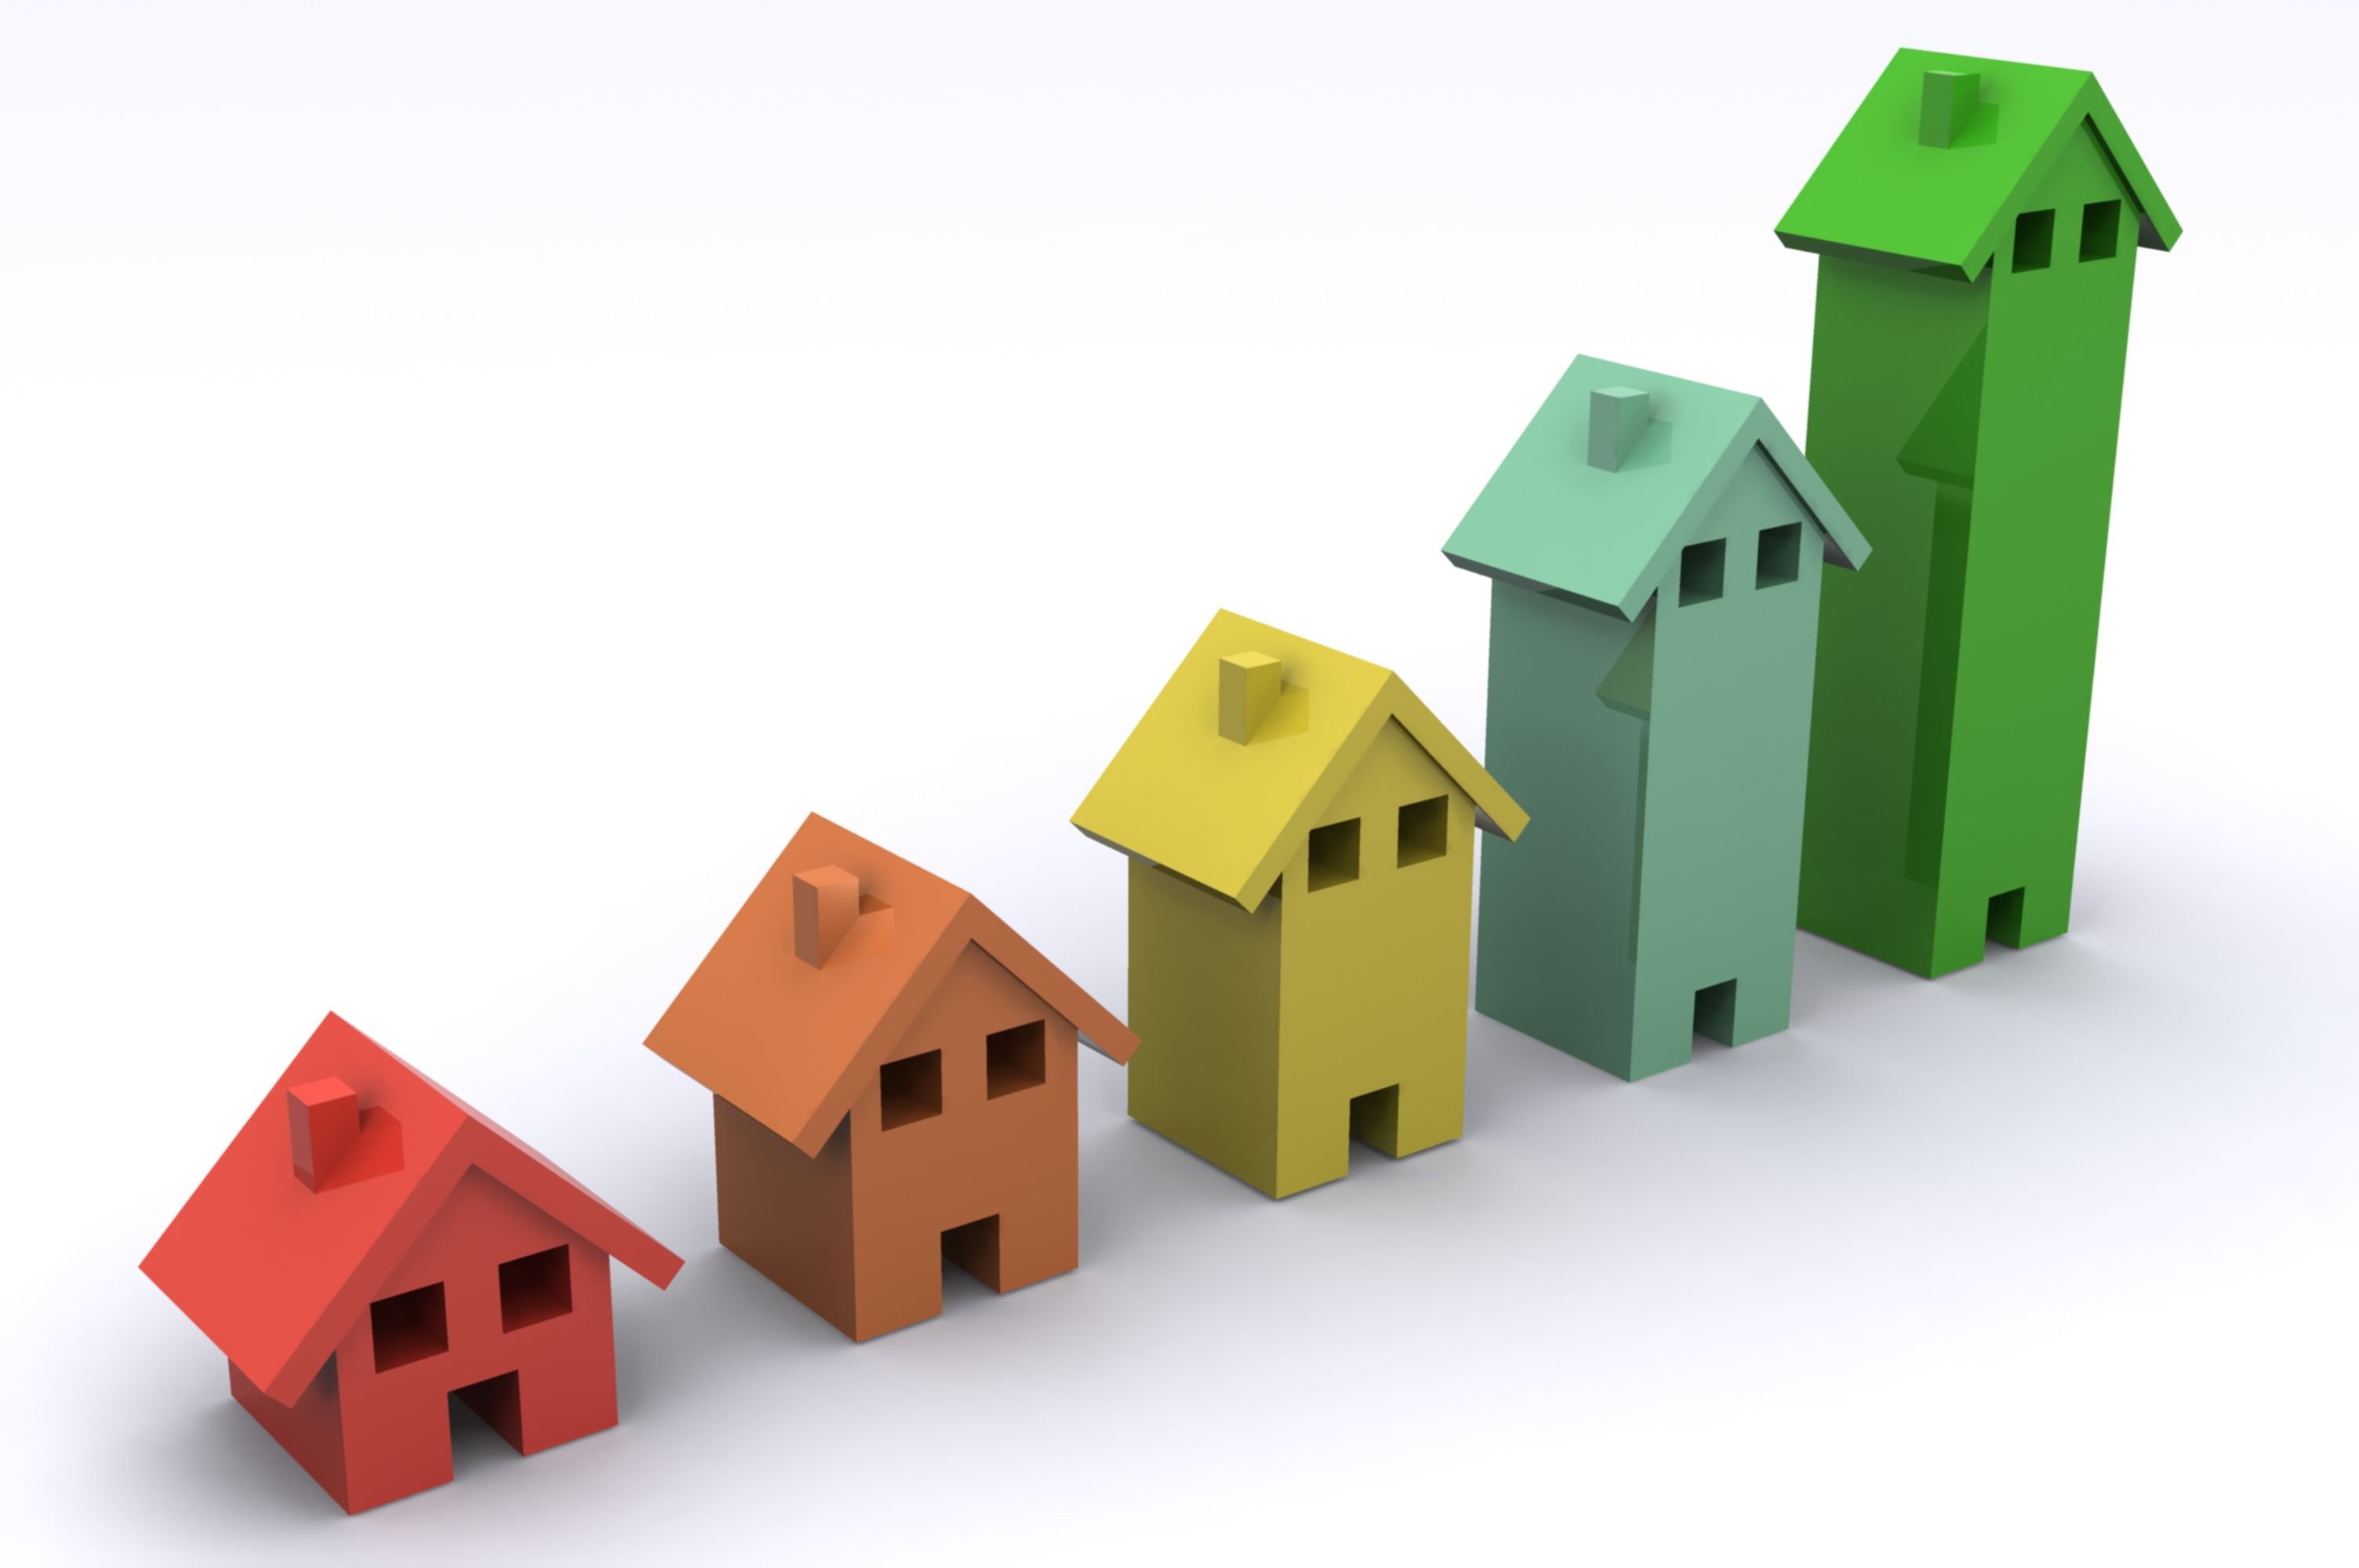 Sweden is leading in terms of house price growth in Europe in 2015